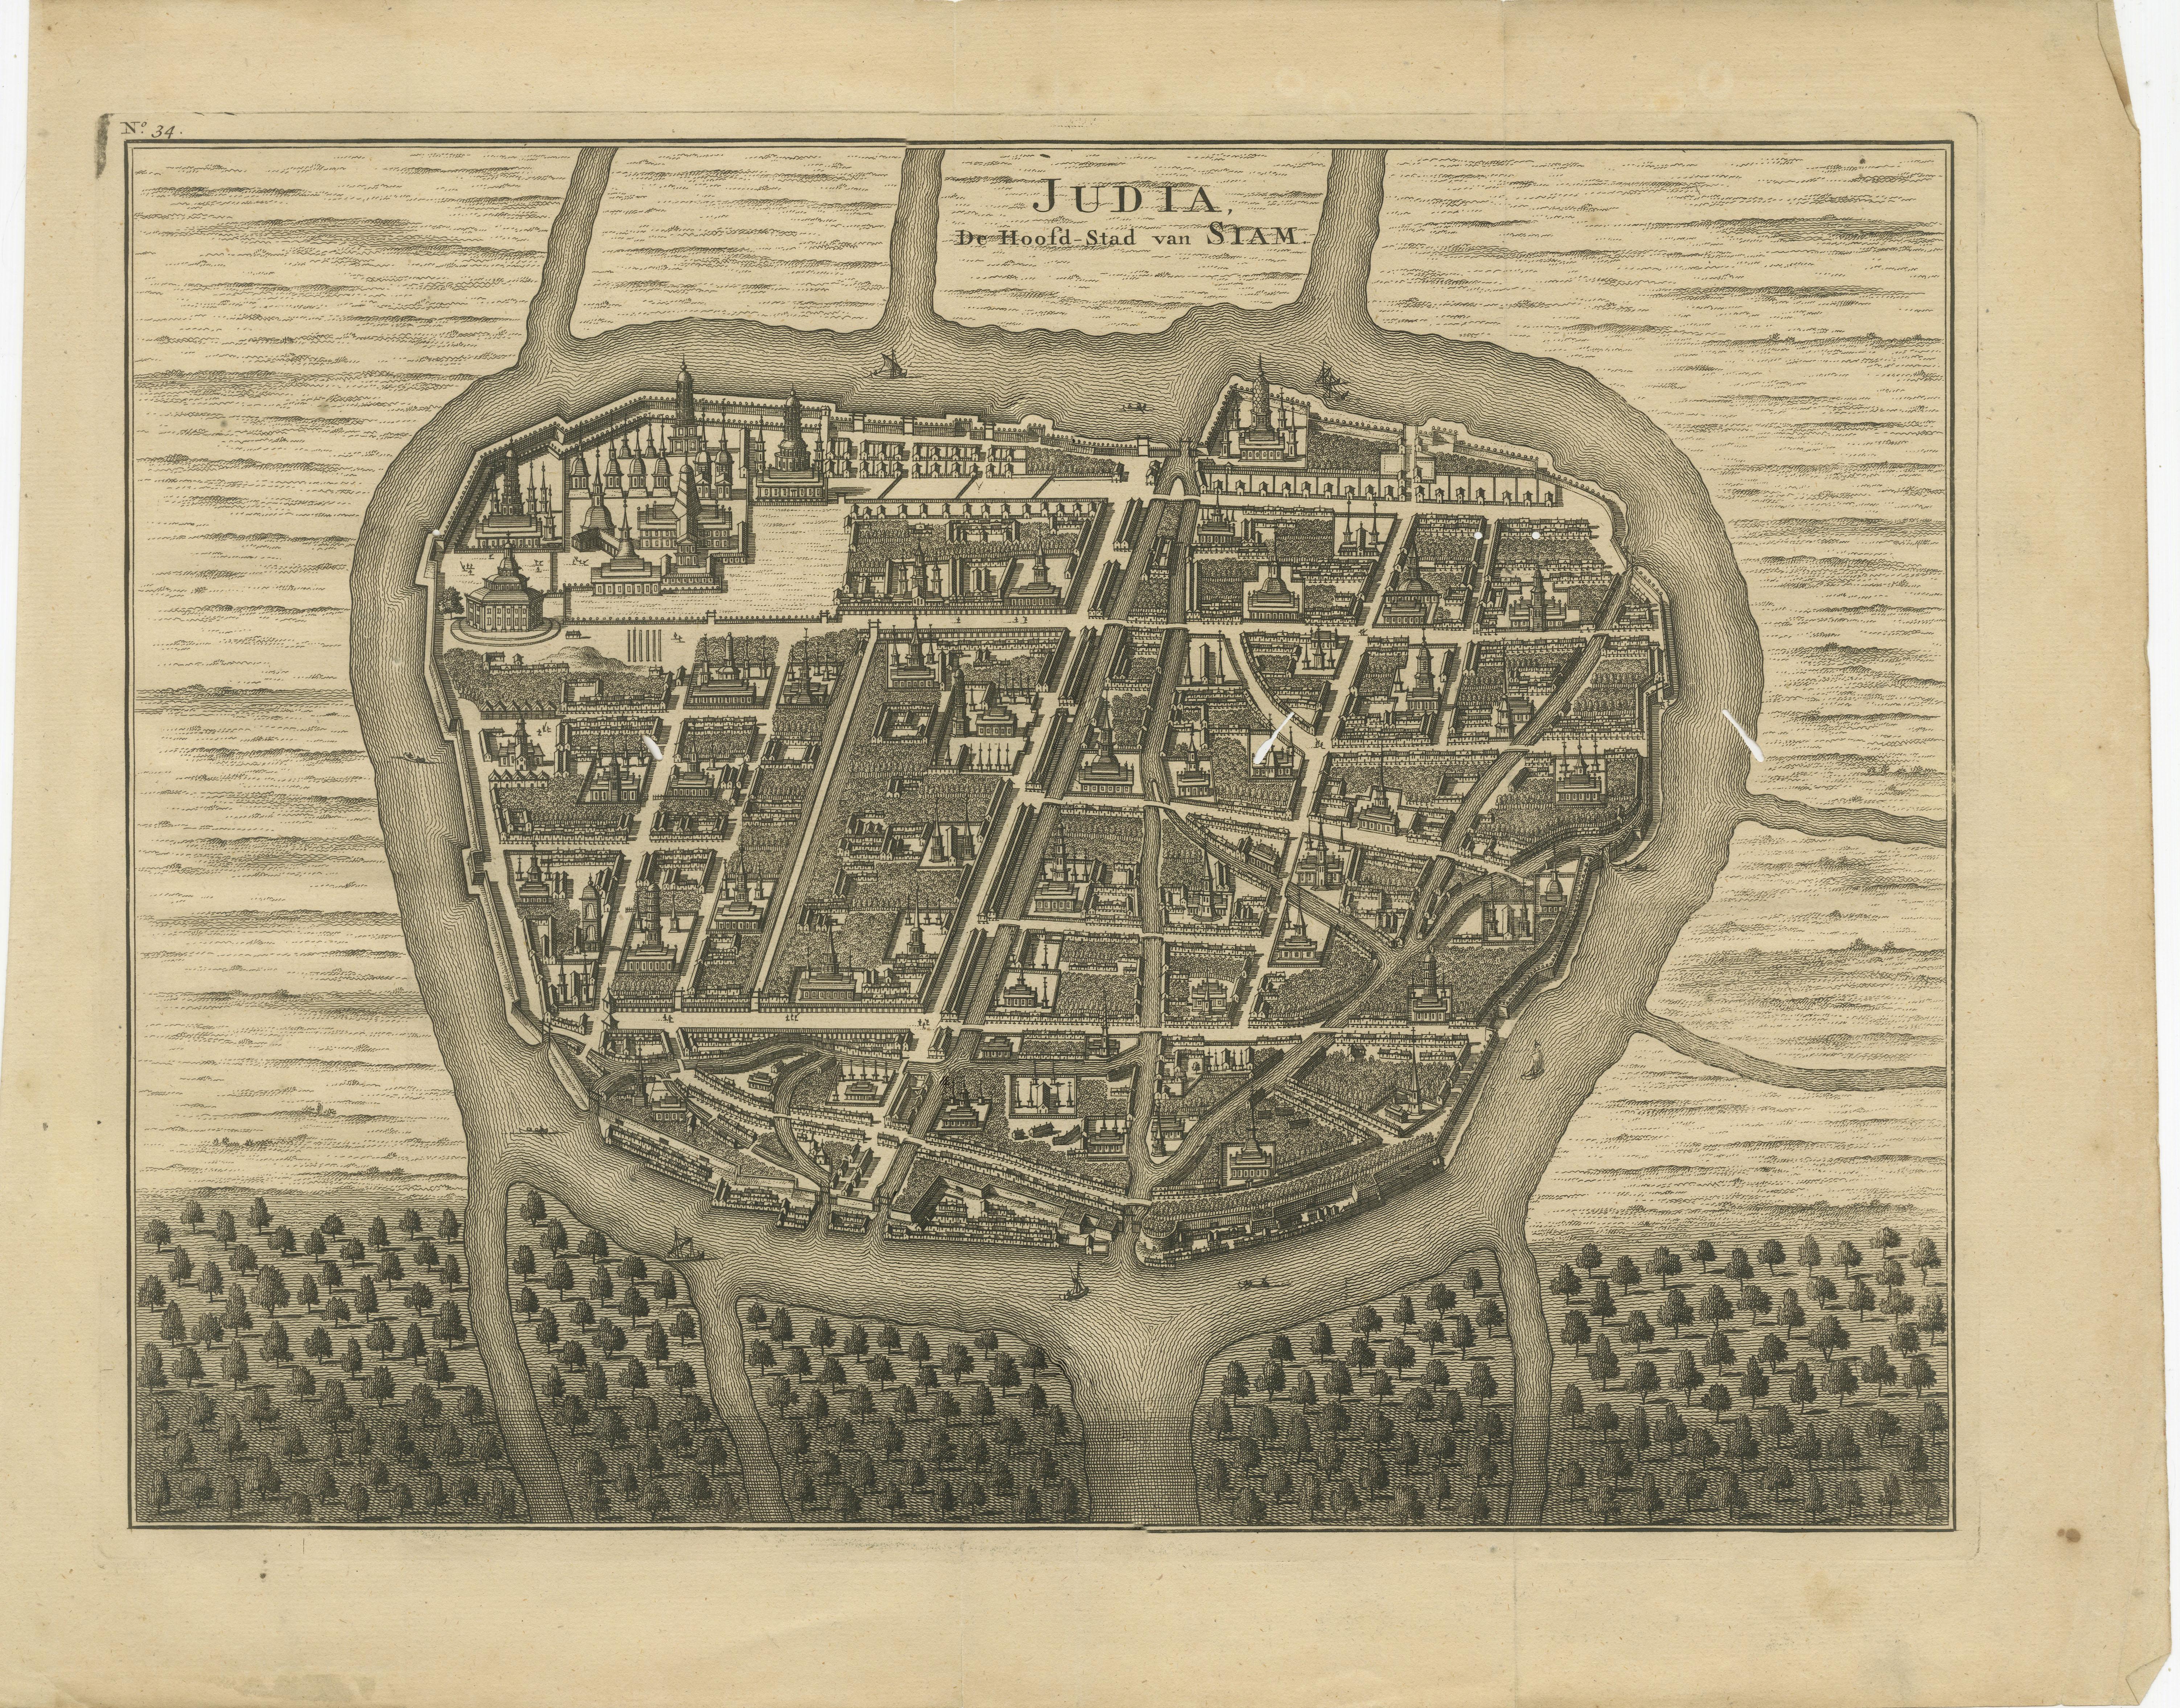 Antique map titled 'Judia, De Hoofd-Stad van Siam'. Antique plan of Ayutthaya, the capital of Siam (Thailand). This print originates from 'Oud en Nieuw Oost-Indiën' by F. Valentijn.

François Valentijn (1666-1727), a missionary, worked at Amboina